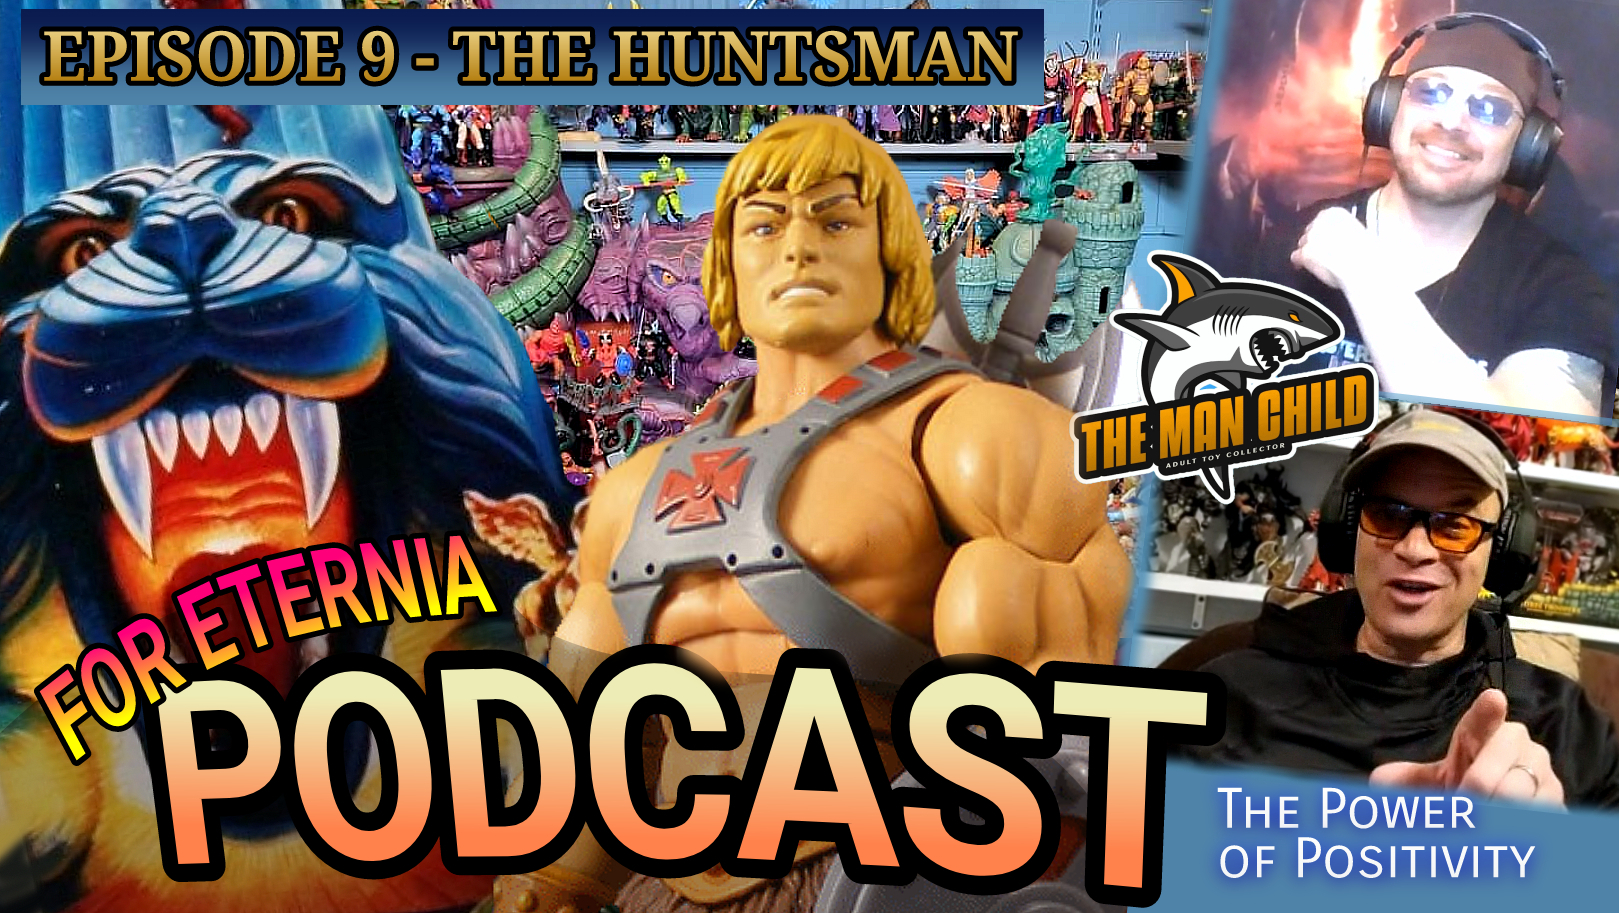 Toys, Trauma and Truthfulness. Chatting with toy collector ”The Man Child” in the FOR ETERNIA Podcast 009!